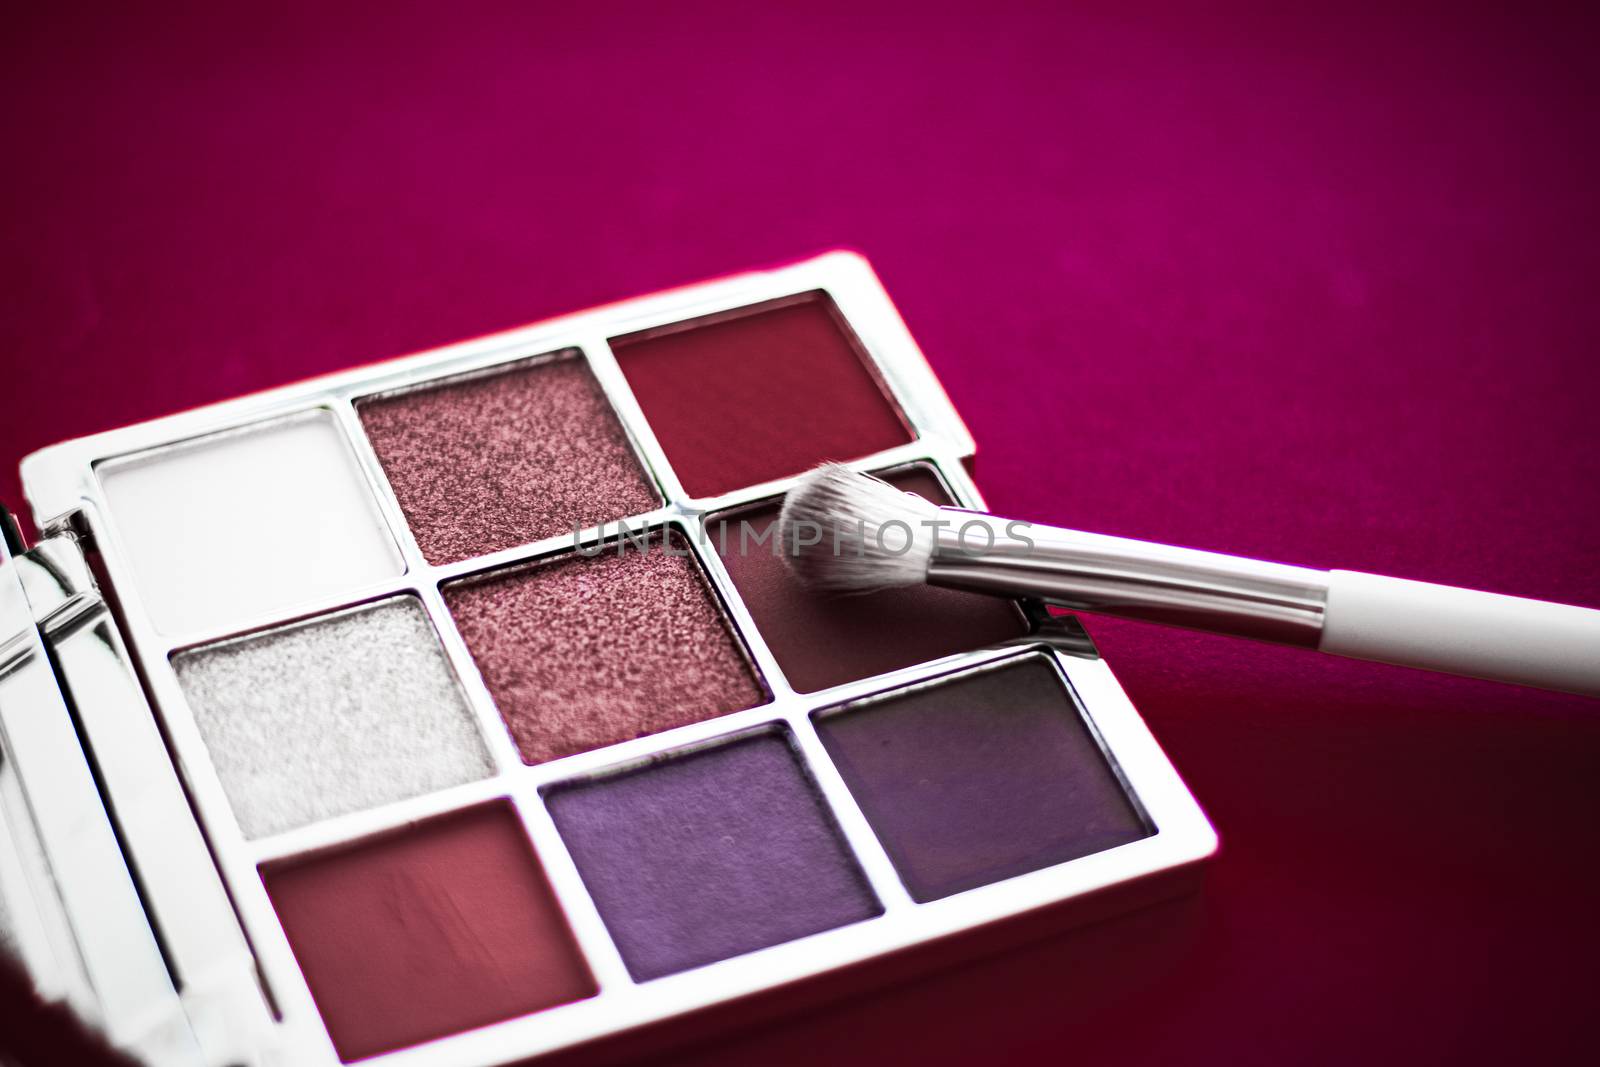 Eyeshadow palette and make-up brush on cherry background, eye sh by Anneleven